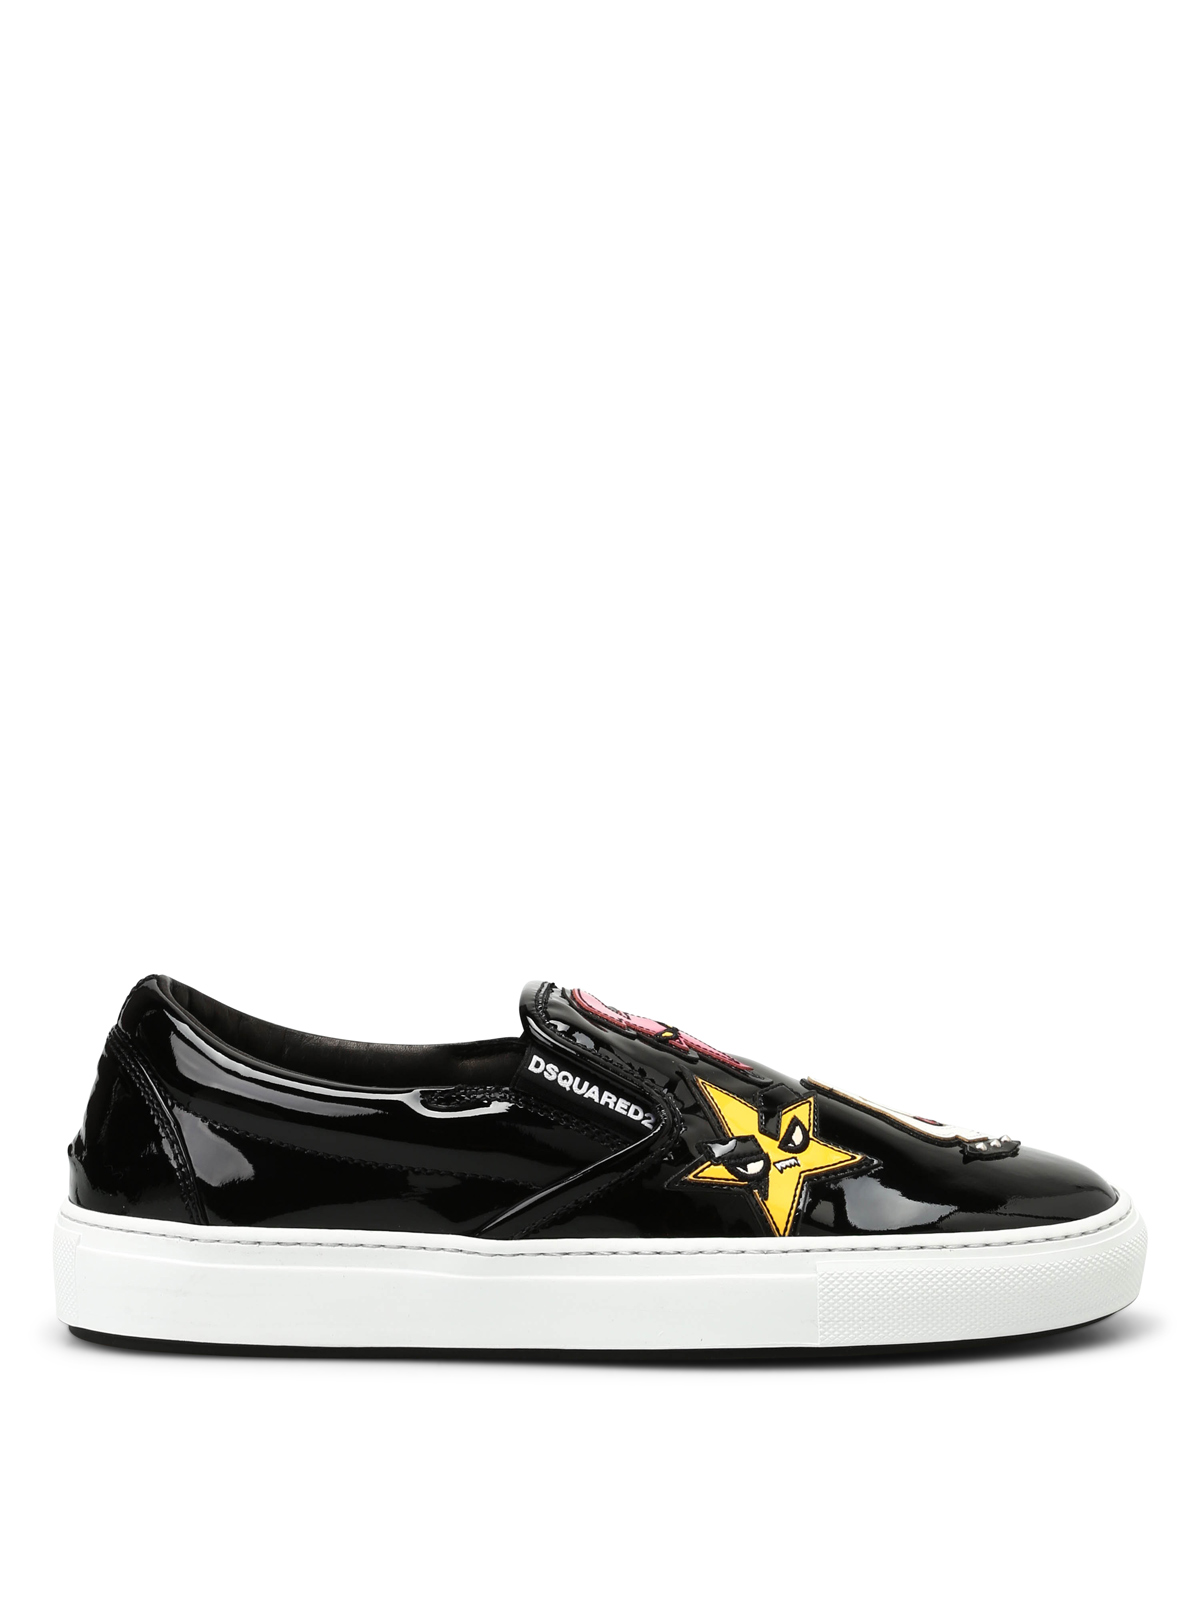 dsquared2 teddy bear sneakers